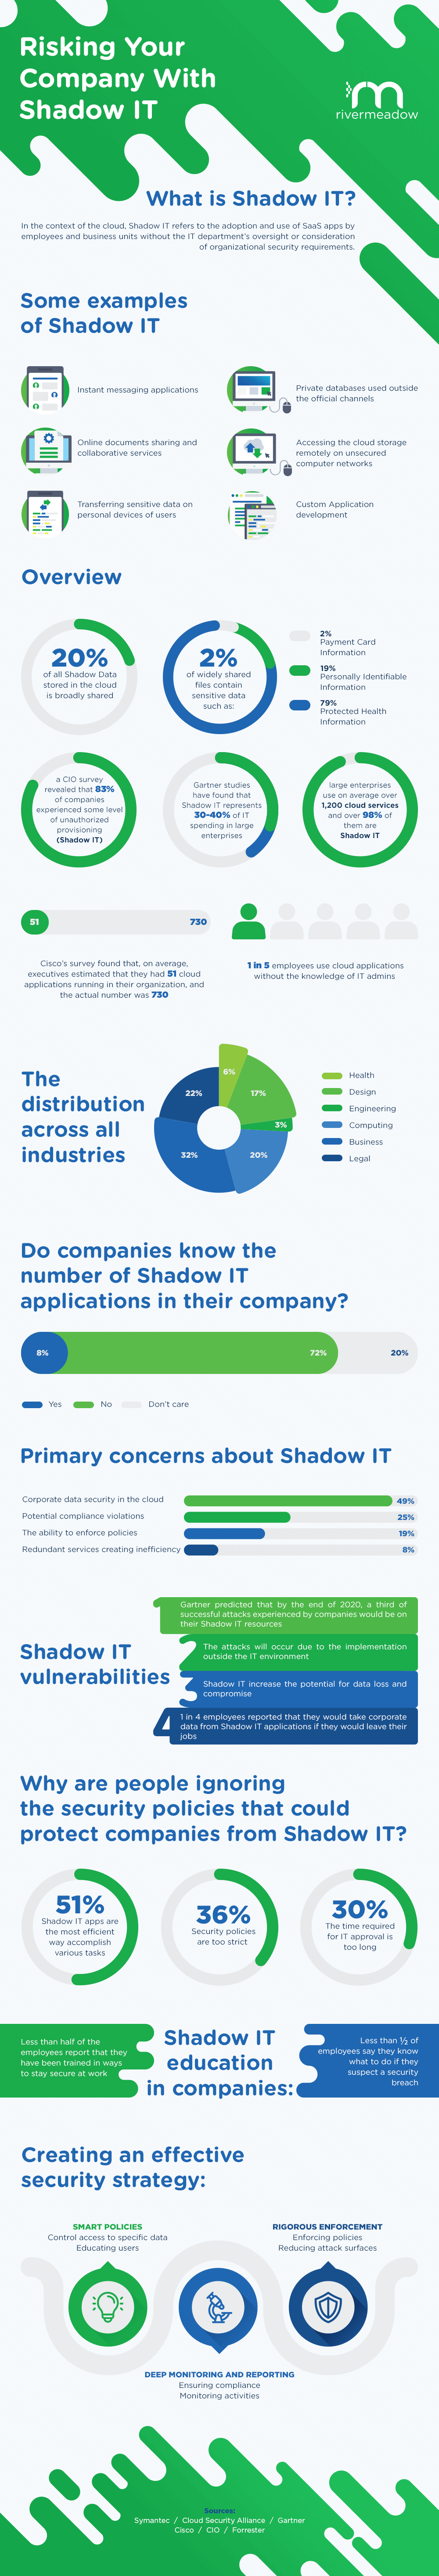 The Cloud and the Impact of Shadow IT